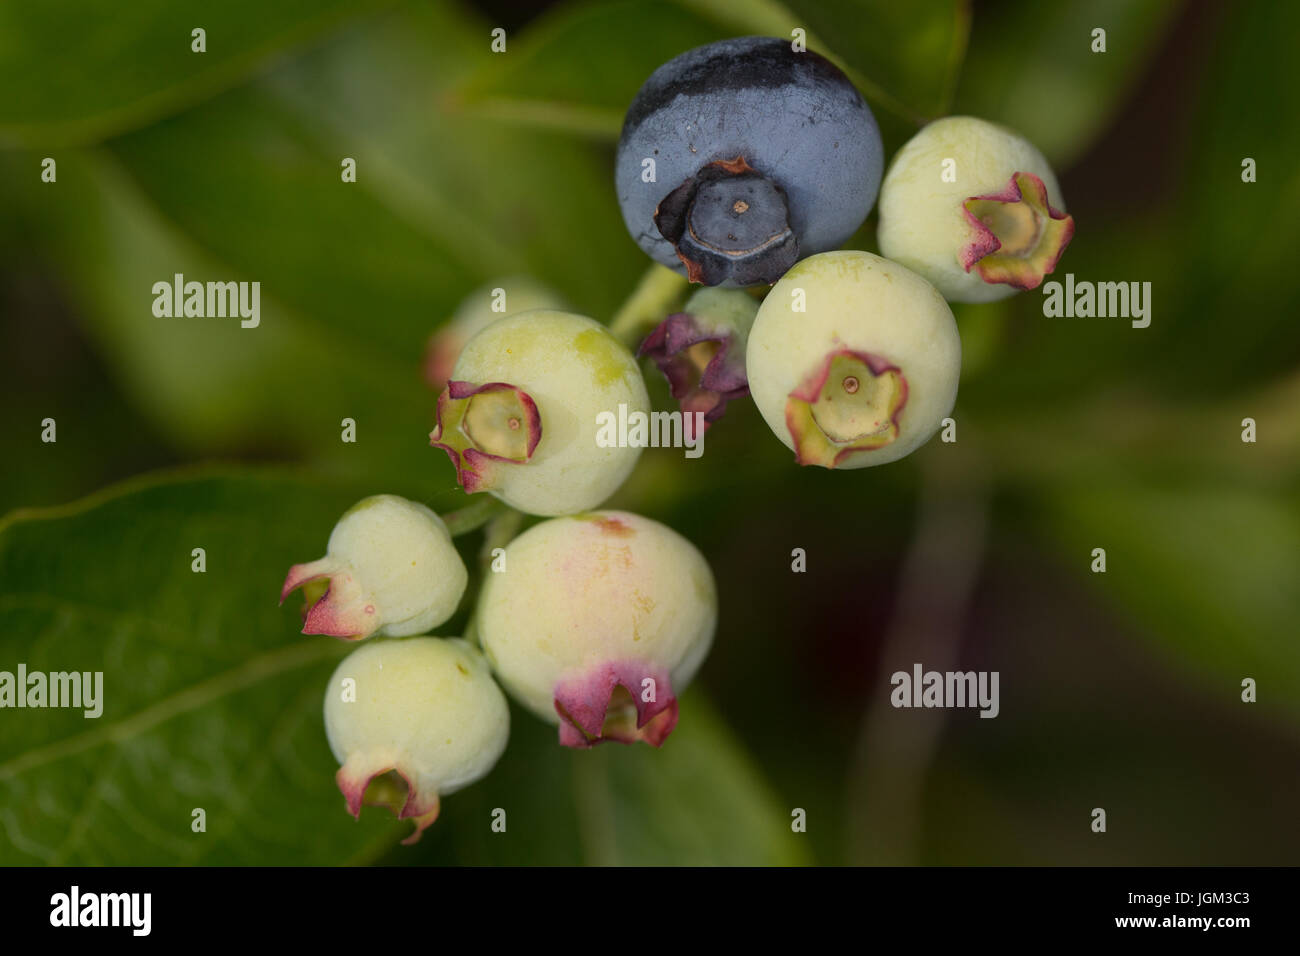 Close up view of a blueberry bush (vaccinium) in a UK garden, with berries at various stages of ripeness. Stock Photo